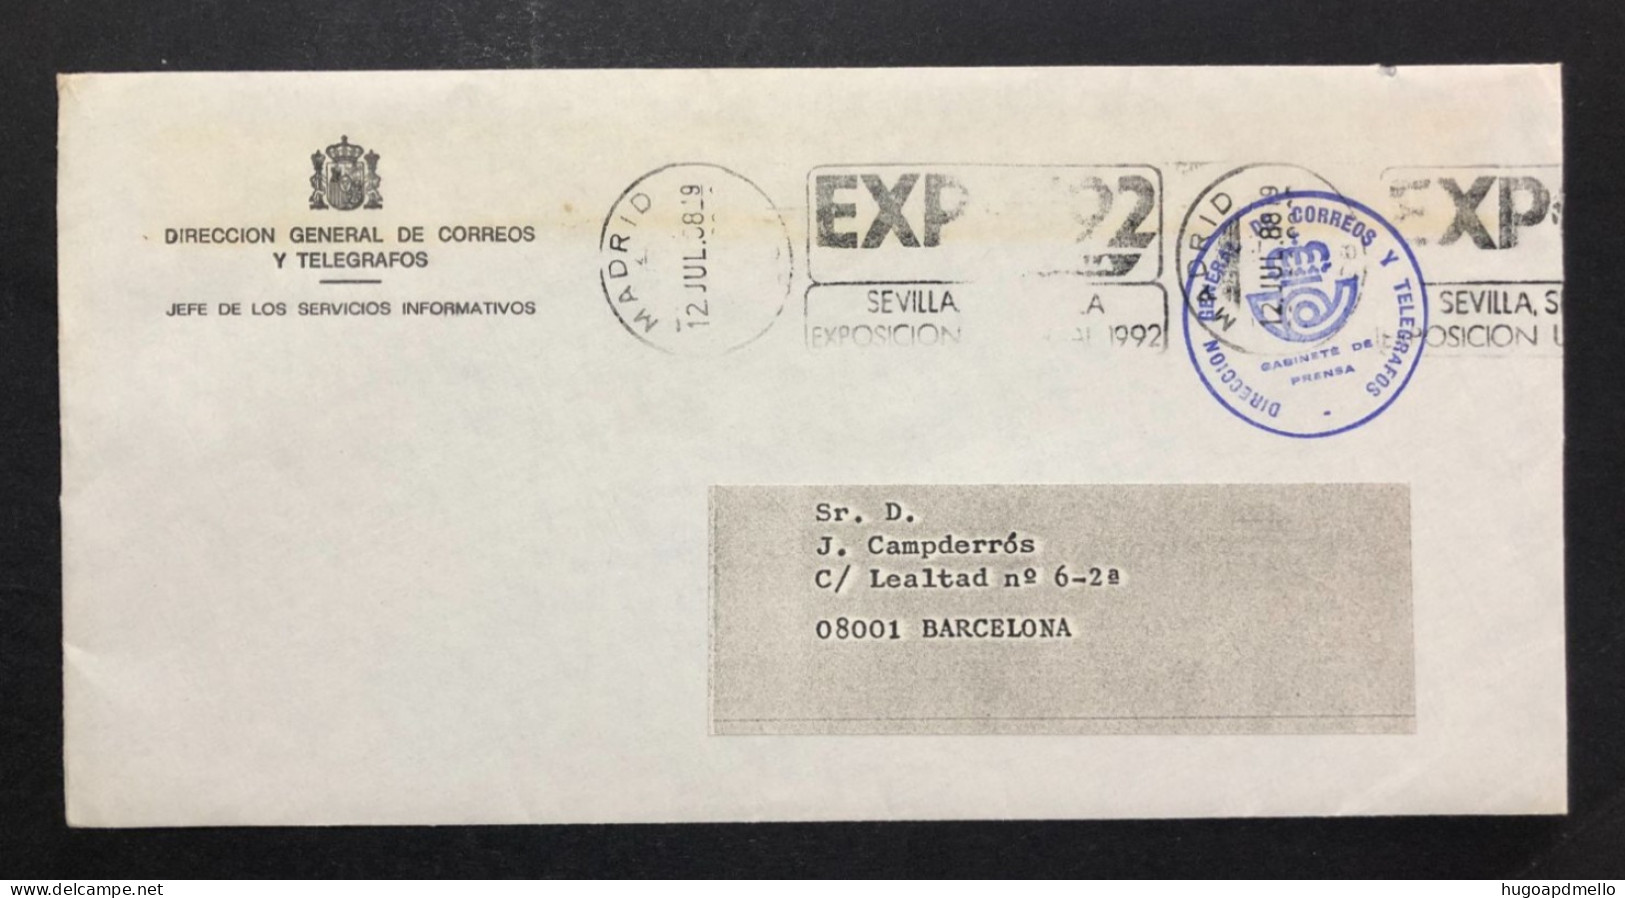 SPAIN, Cover With Special Cancellation « EXPO '92 », « MADRID Postmark », 1988 - 1992 – Séville (Espagne)